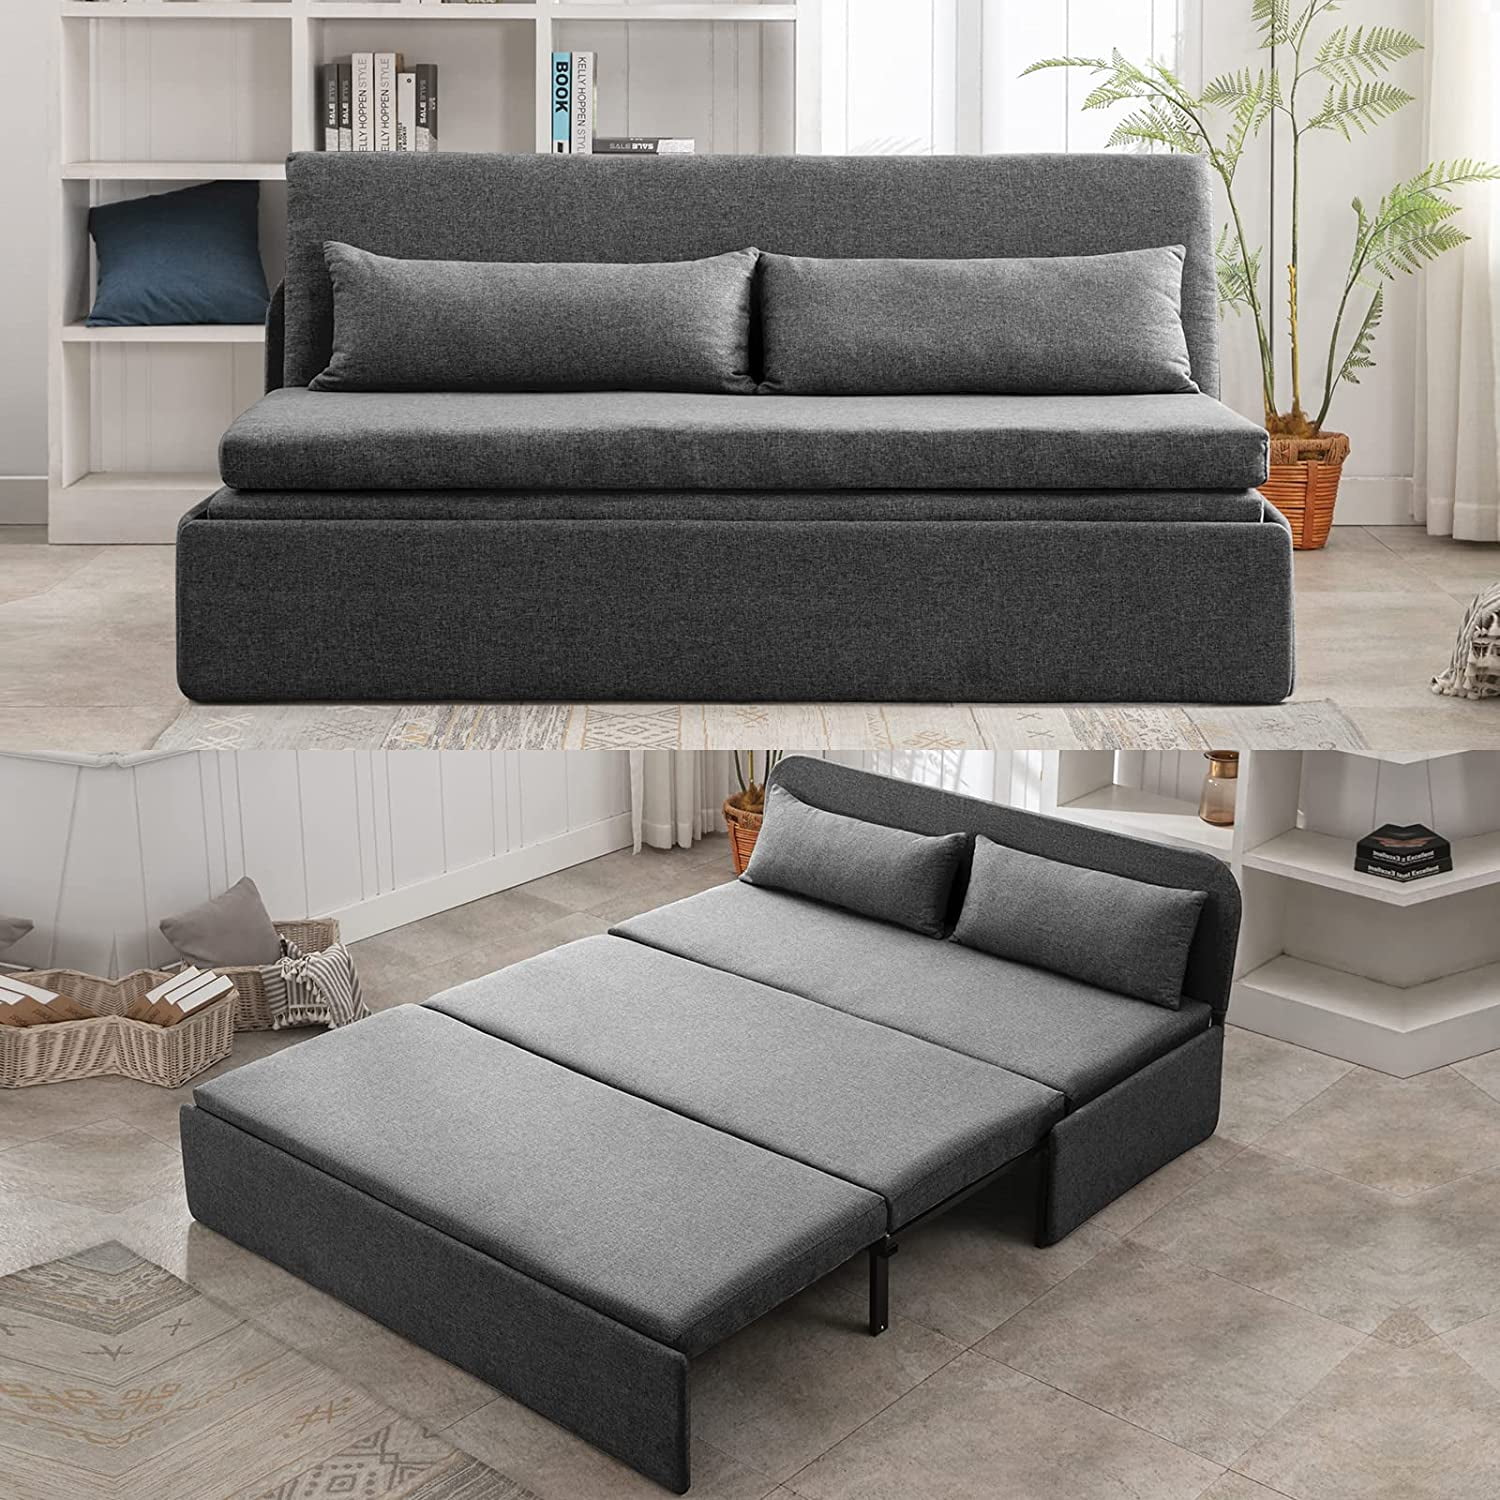 Golf tuin optellen Mjkone Queen Size Convertible Sofa Bed, Modern Pull Out Linen Sleeper Sofa  Couch, Revesible Couch Bed with Cushions&Throw Pillows for Small  Place/Apartment/Living Room/Office/Studio (Dark Gray) - Walmart.com